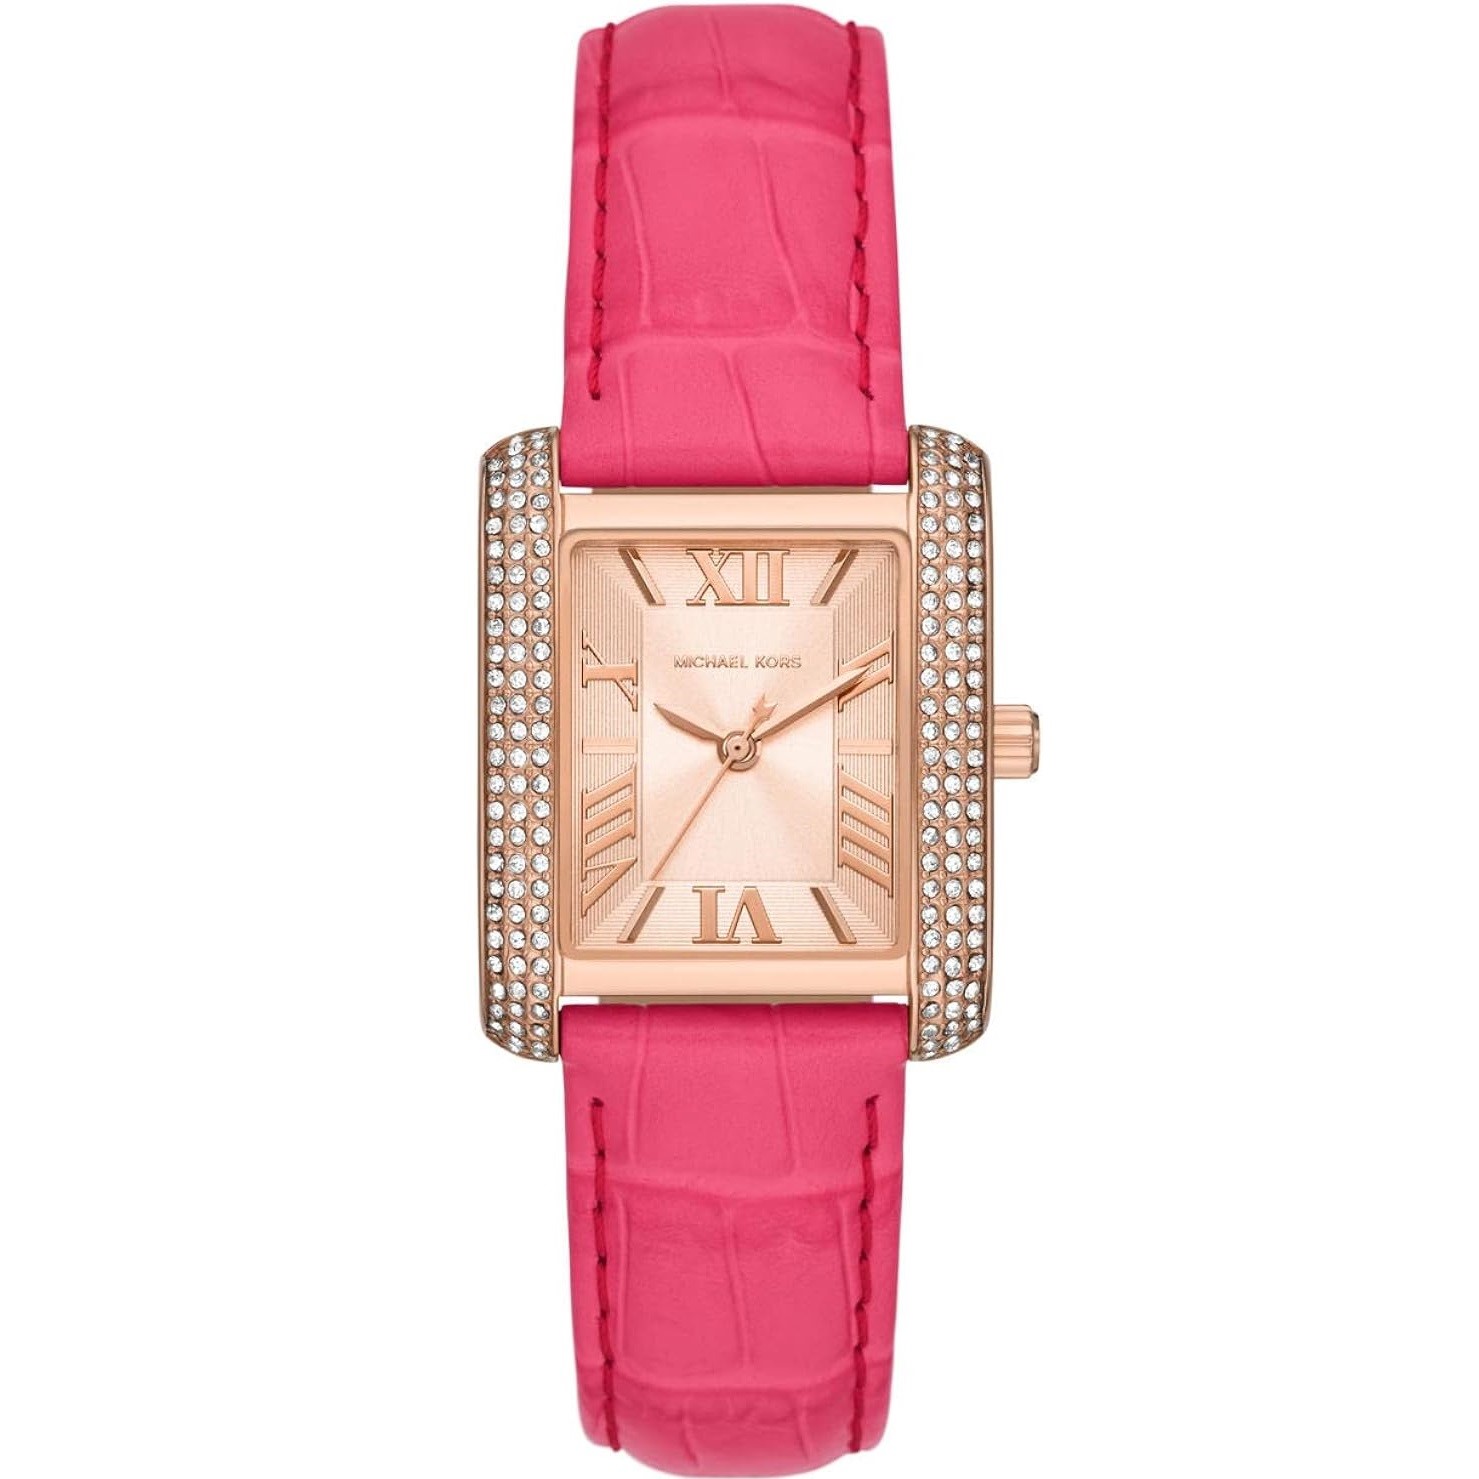 ĐỒNG HỒ MK NỮ MICHAEL KORS EMERY PAVÉ ROSE GOLD-TONE AND CROCODILE EMBOSSED LEATHER WATCH MK2984 2